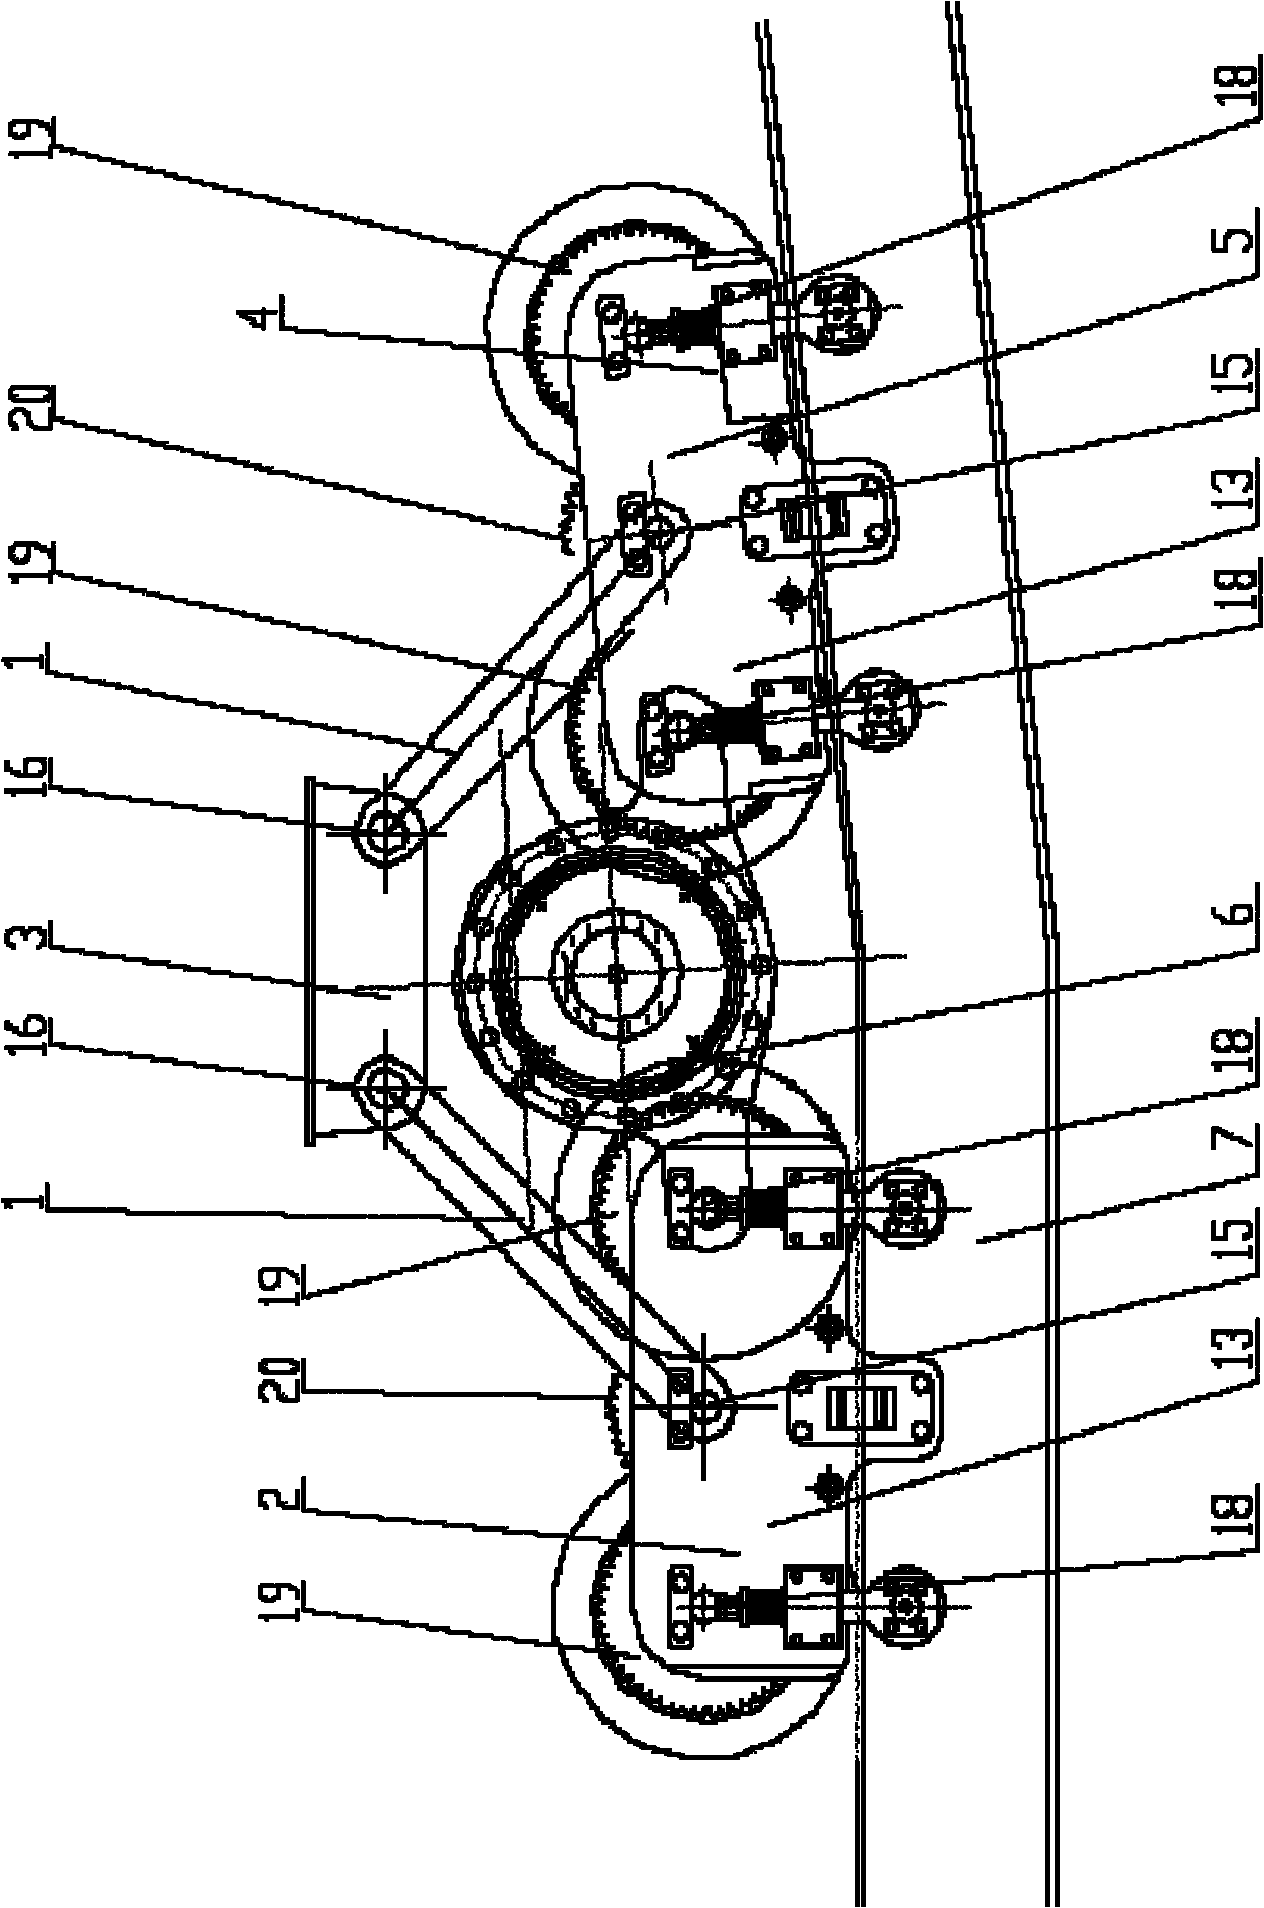 Running mechanism for arched bridge inspection car